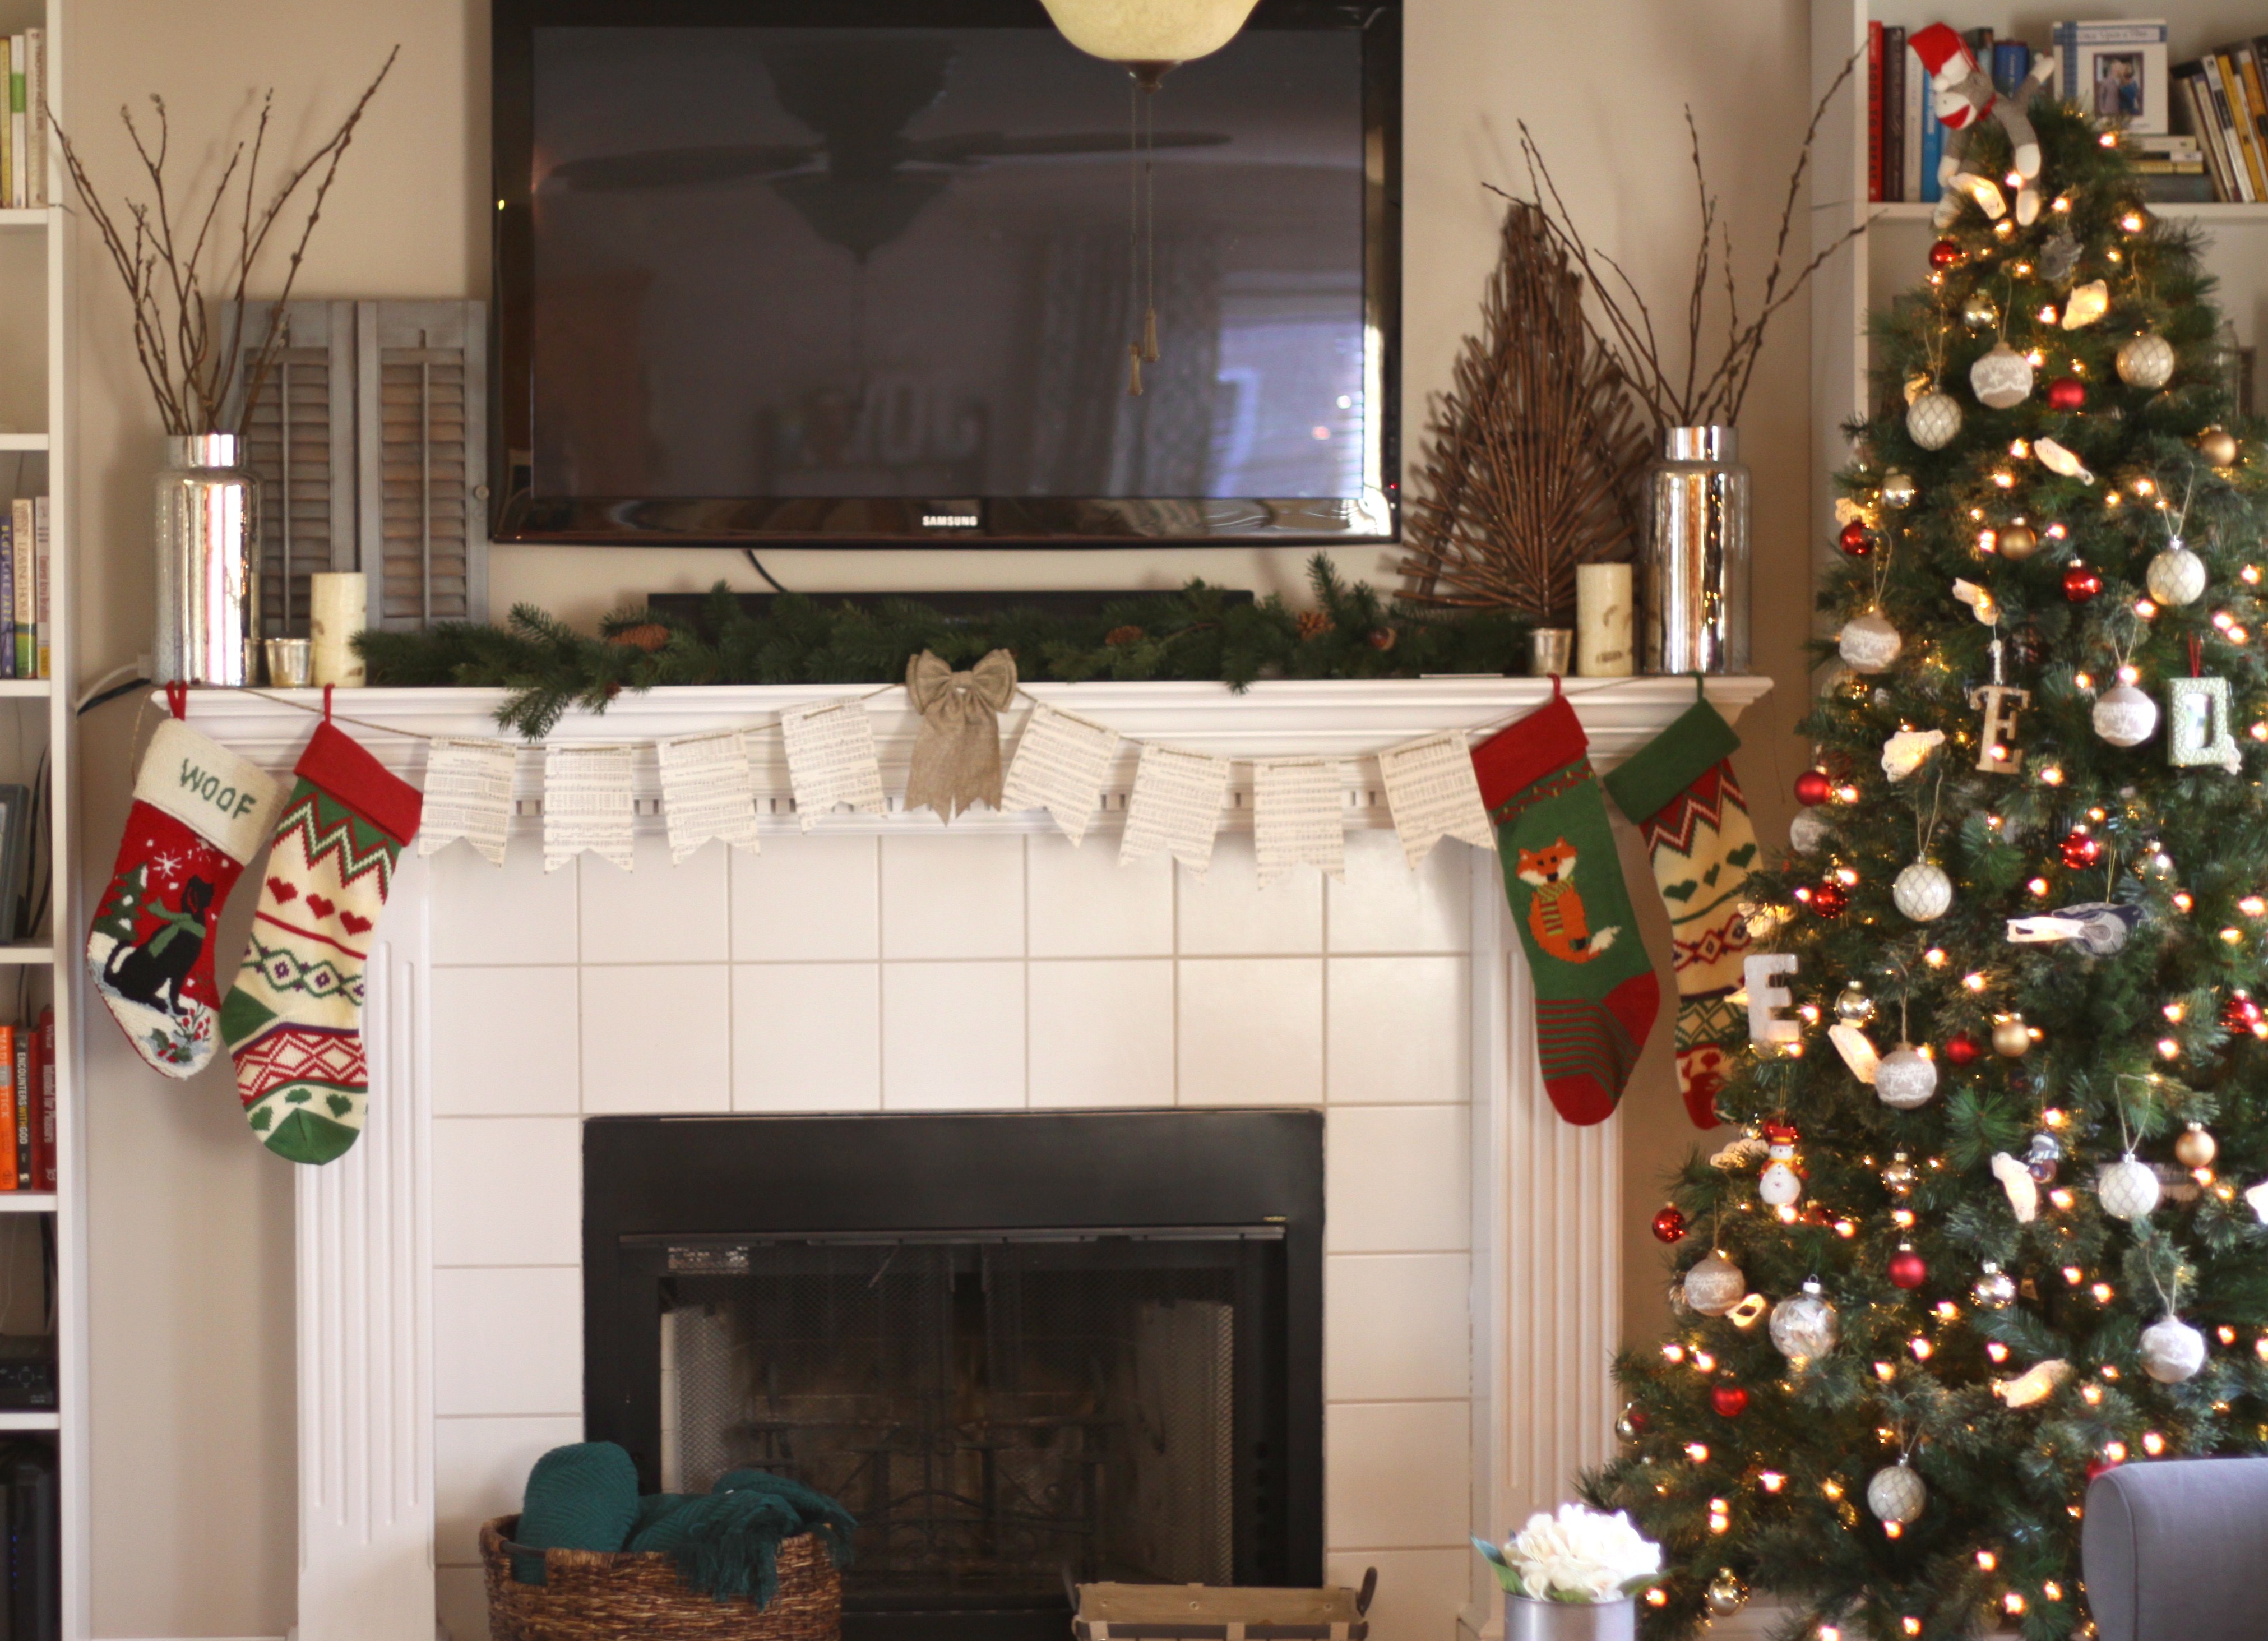 Beautiful Christmas home tour with neutrals, vintage touches, and pops of red and green! So many pretty and easy ideas!